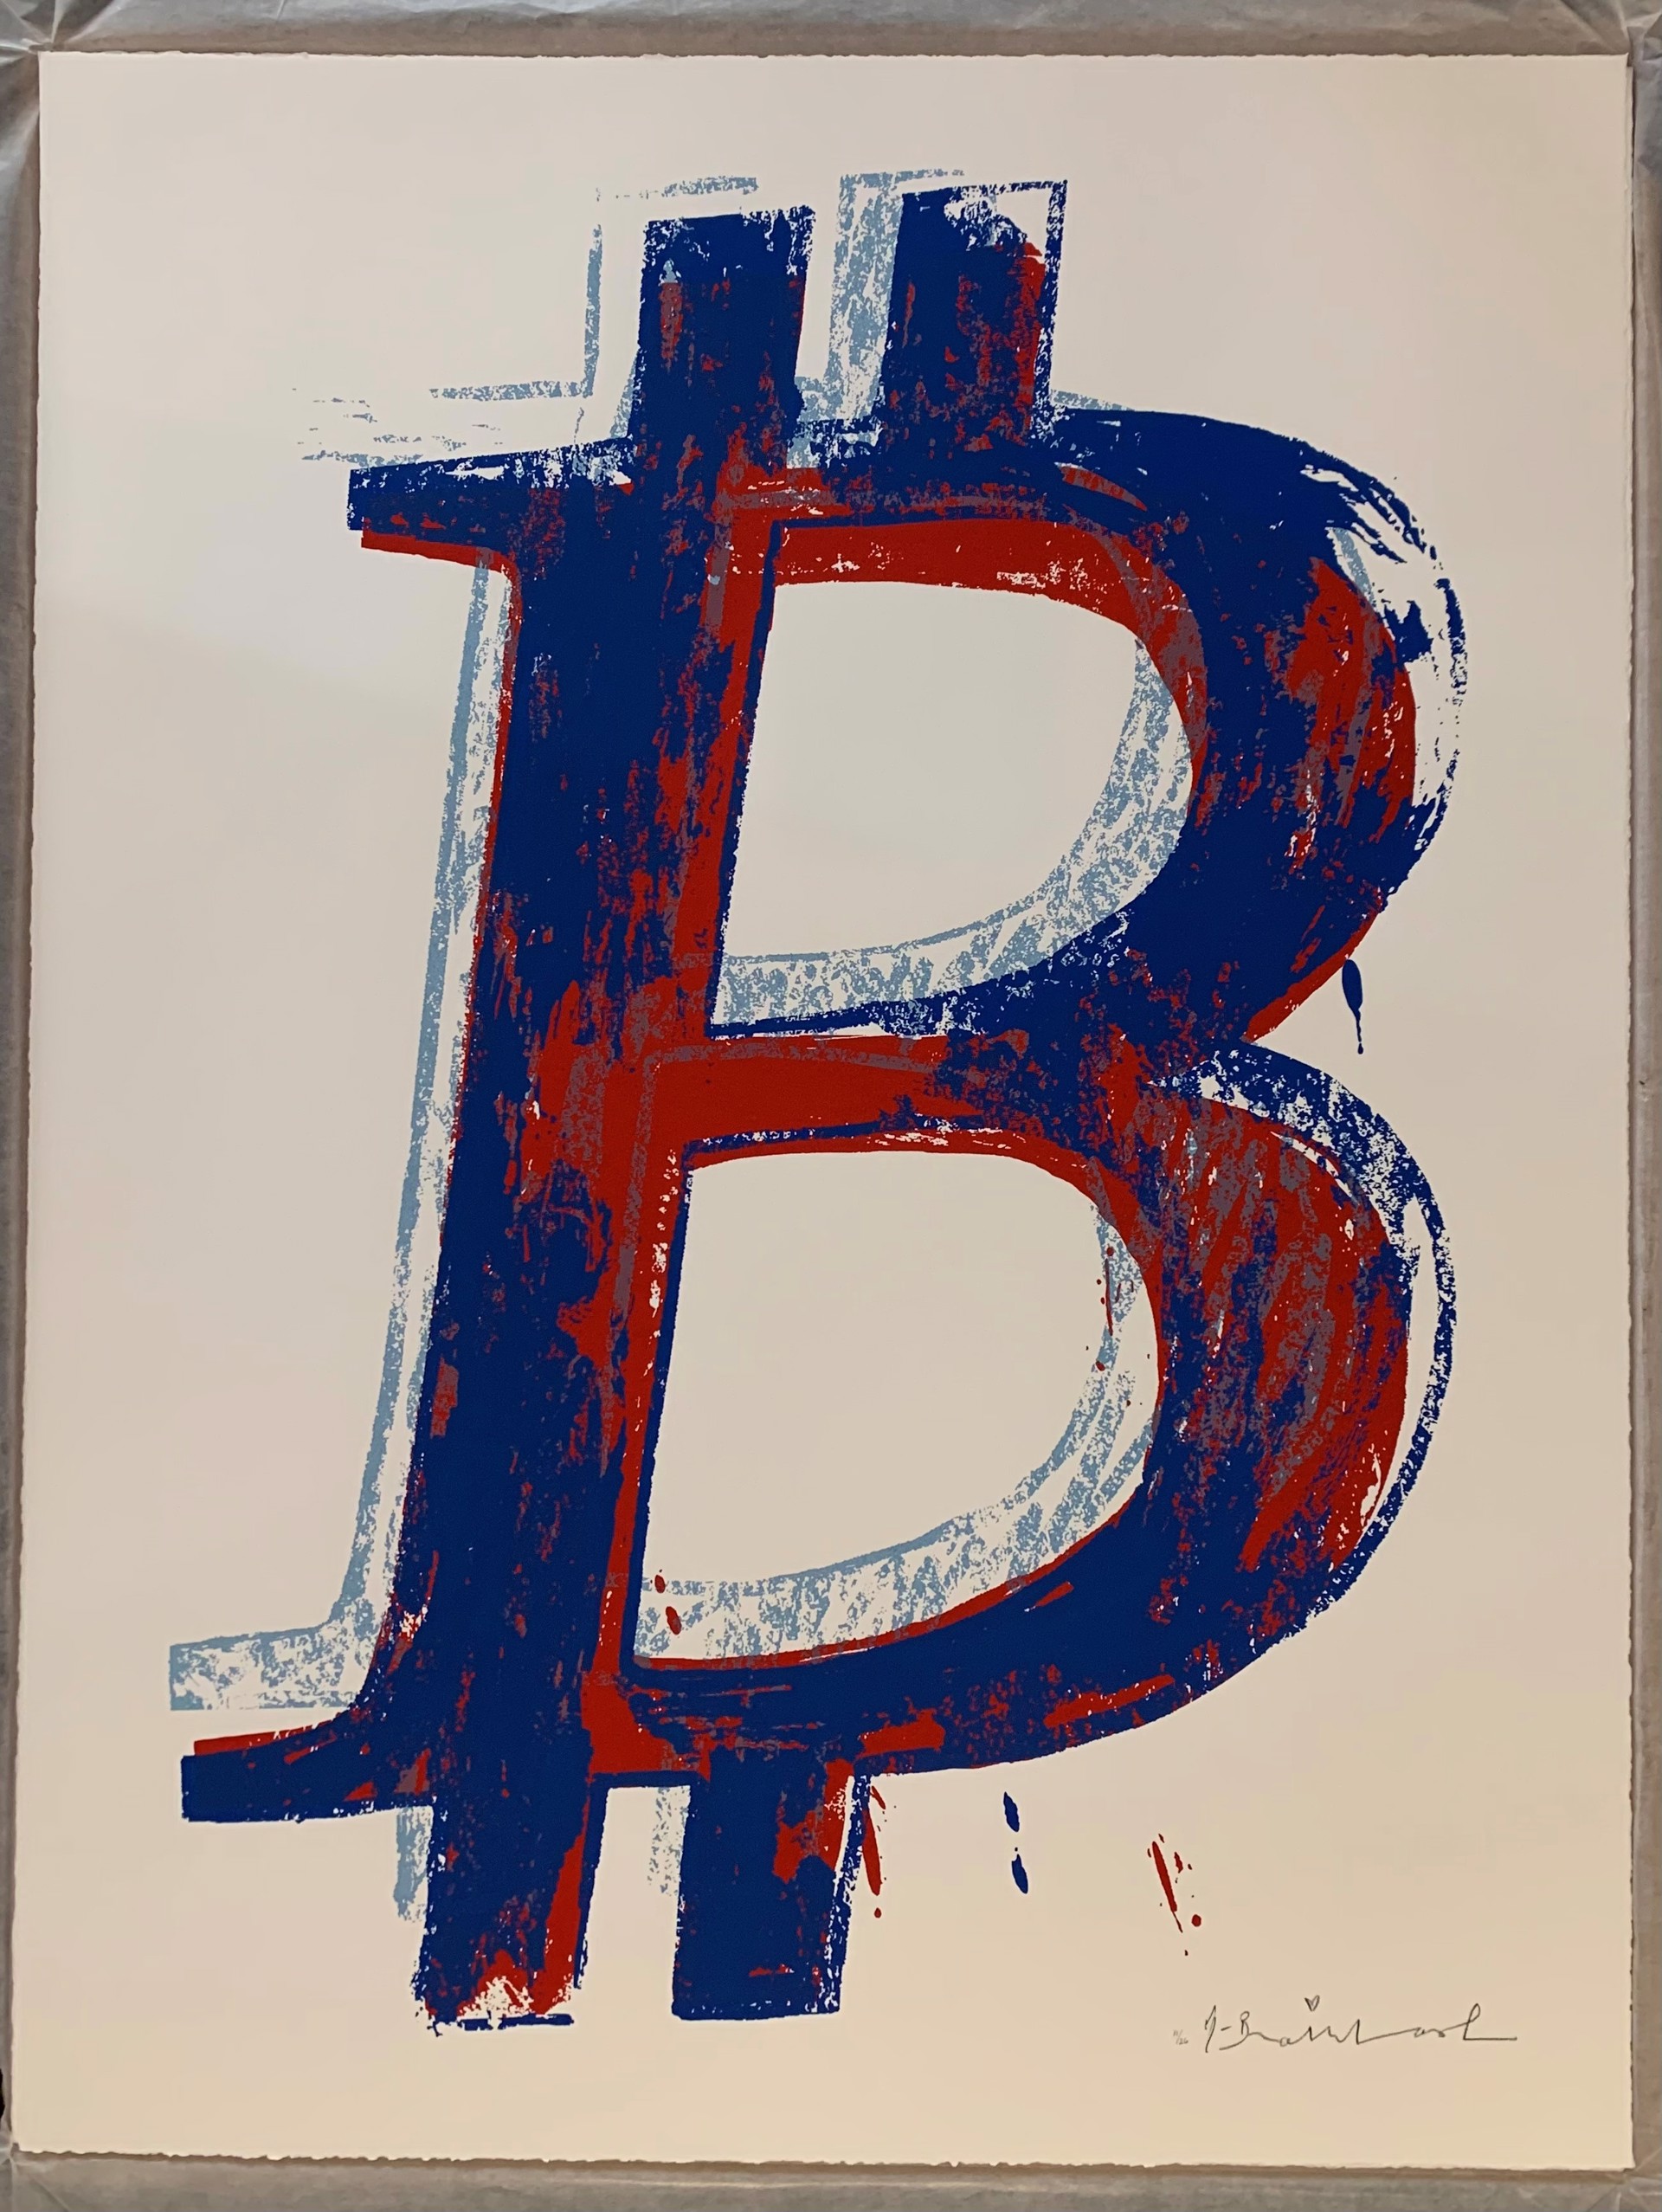 Bitcoin Suite, complete set of 8 prints by Mr. Brainwash